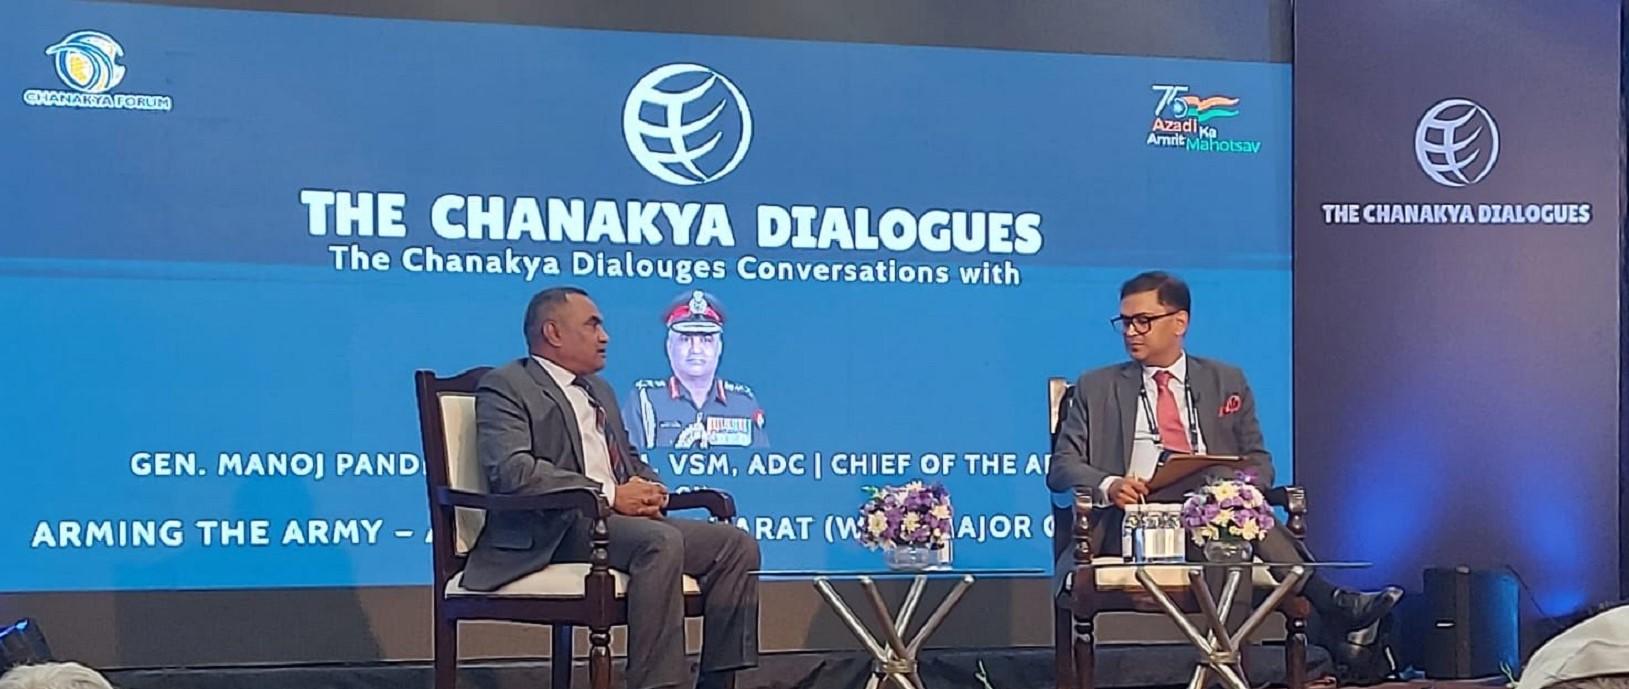 Situation stable but unpredictable along LAC, China building infra unabated: Gen Manoj Pande